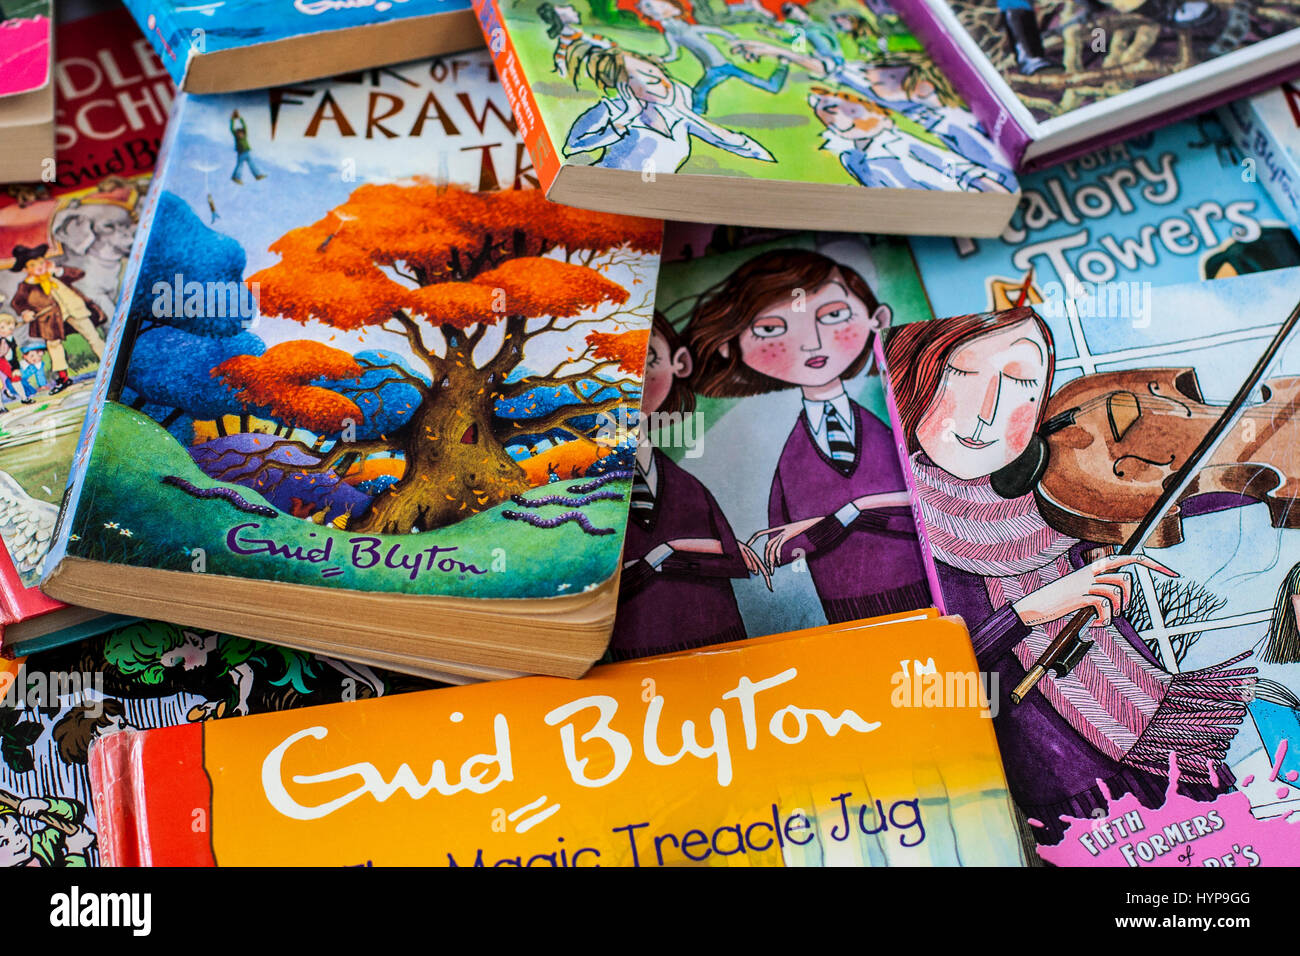 Stack / Pile of Enid Blyton Books, classic kids books, childrens books, young readers Stock Photo